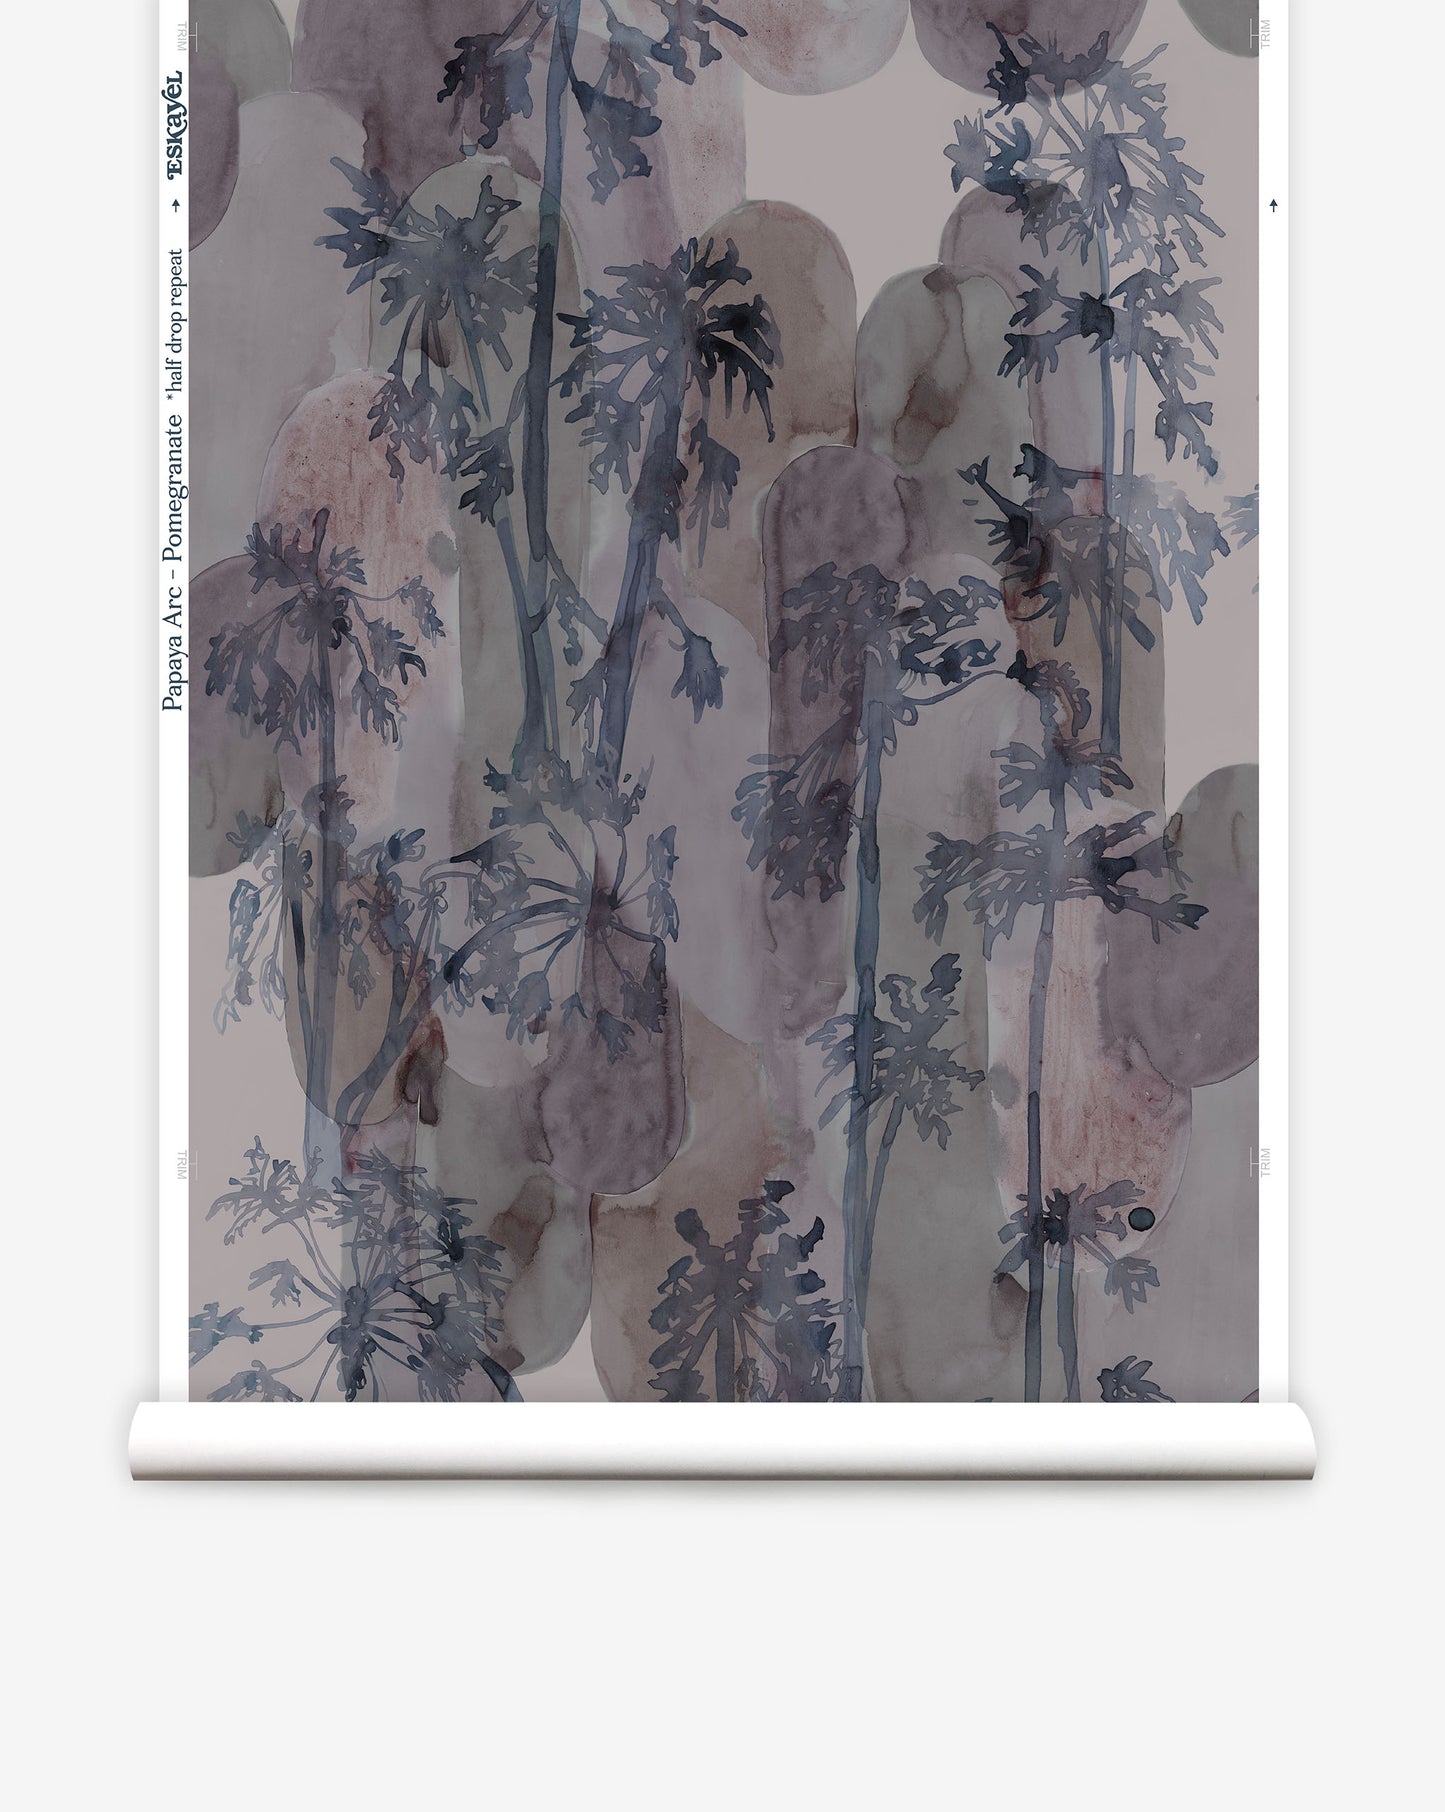 Depicting watercolor studies of a tropical tree, Papaya Arc wallpaper in our Pomegranate colorway features blue, purple and grey.